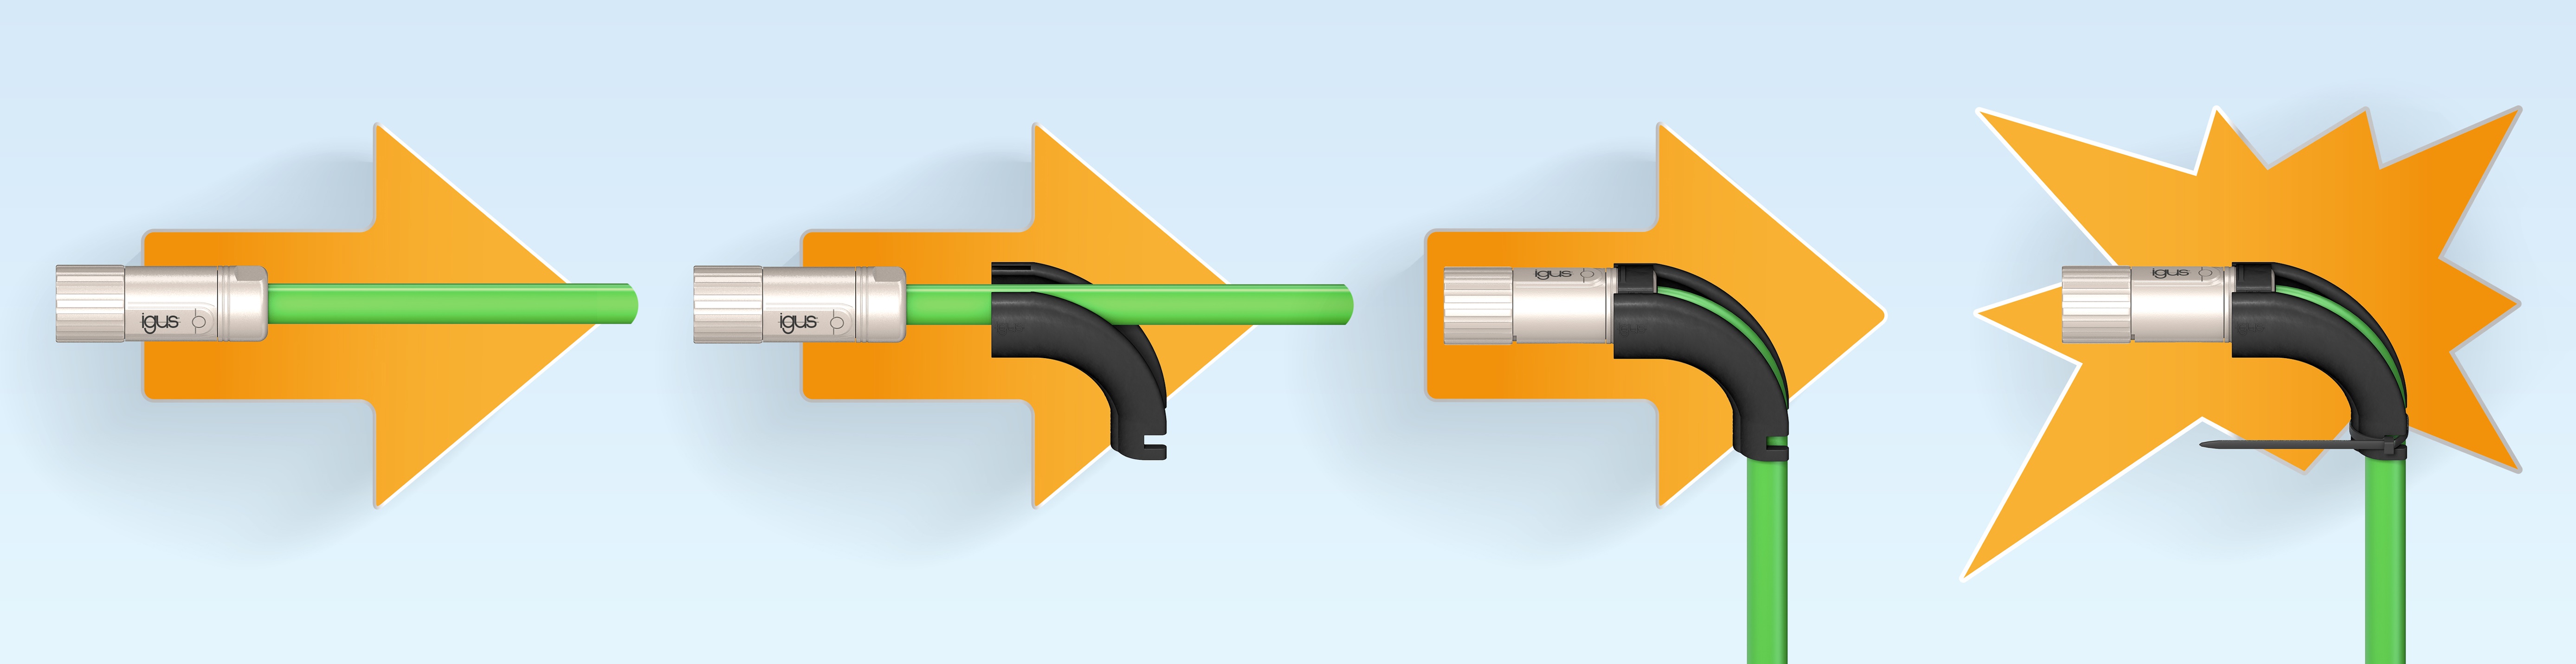 Ibow can be used to change a straight connector to an angled one